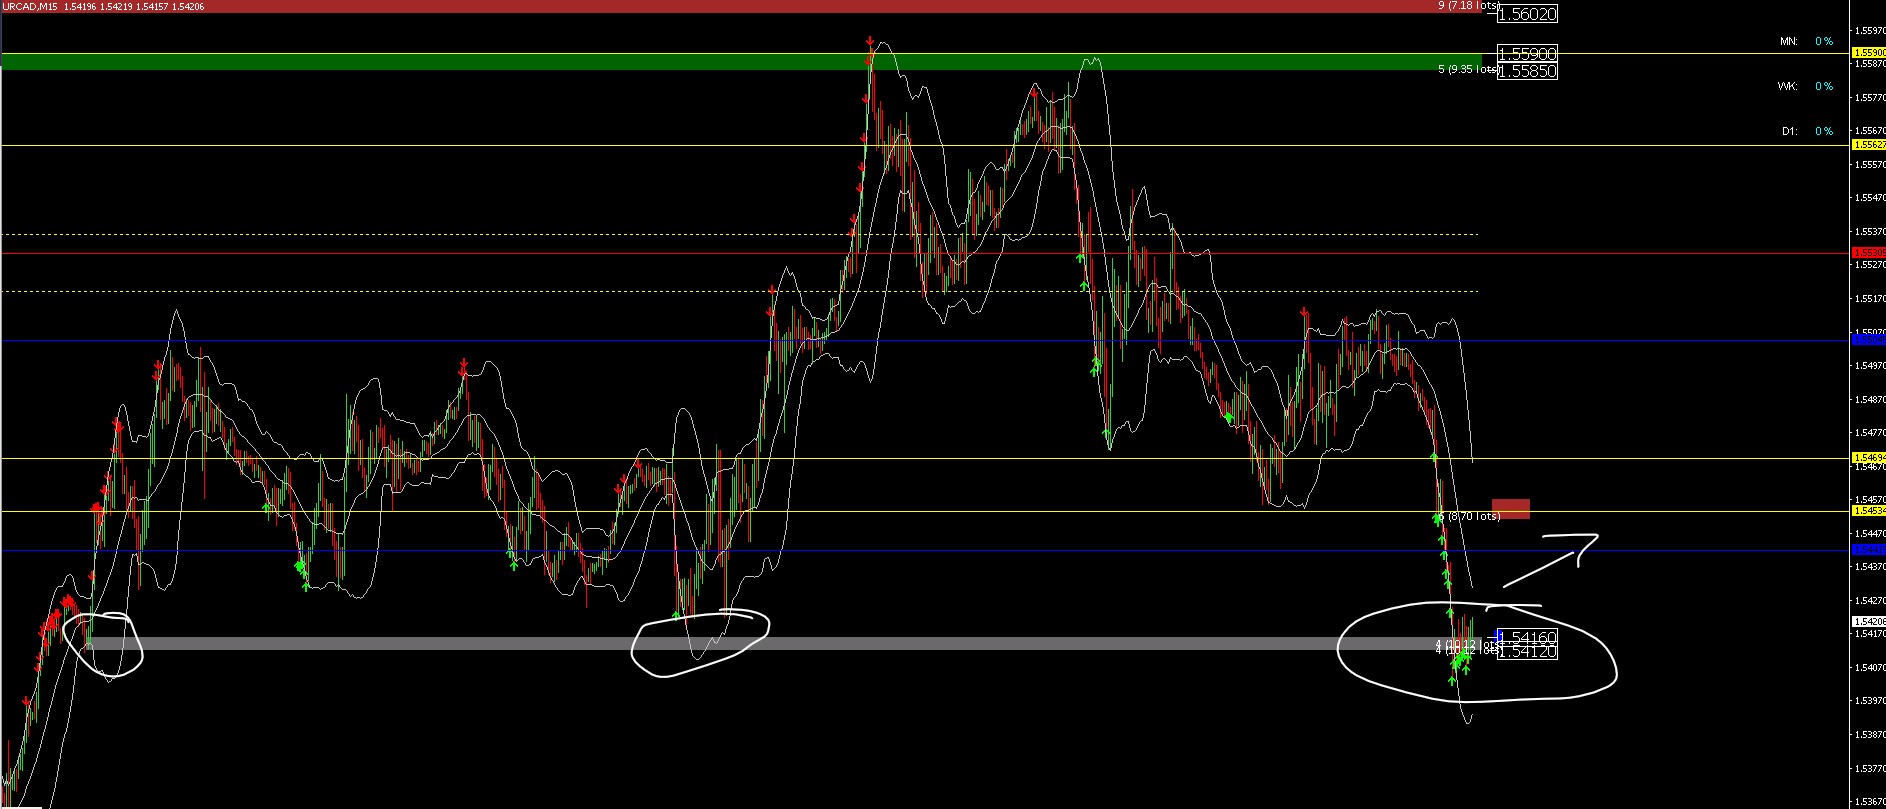 EUR/CAD M15 Supply and Demand + Extremes RSI and Bollinger